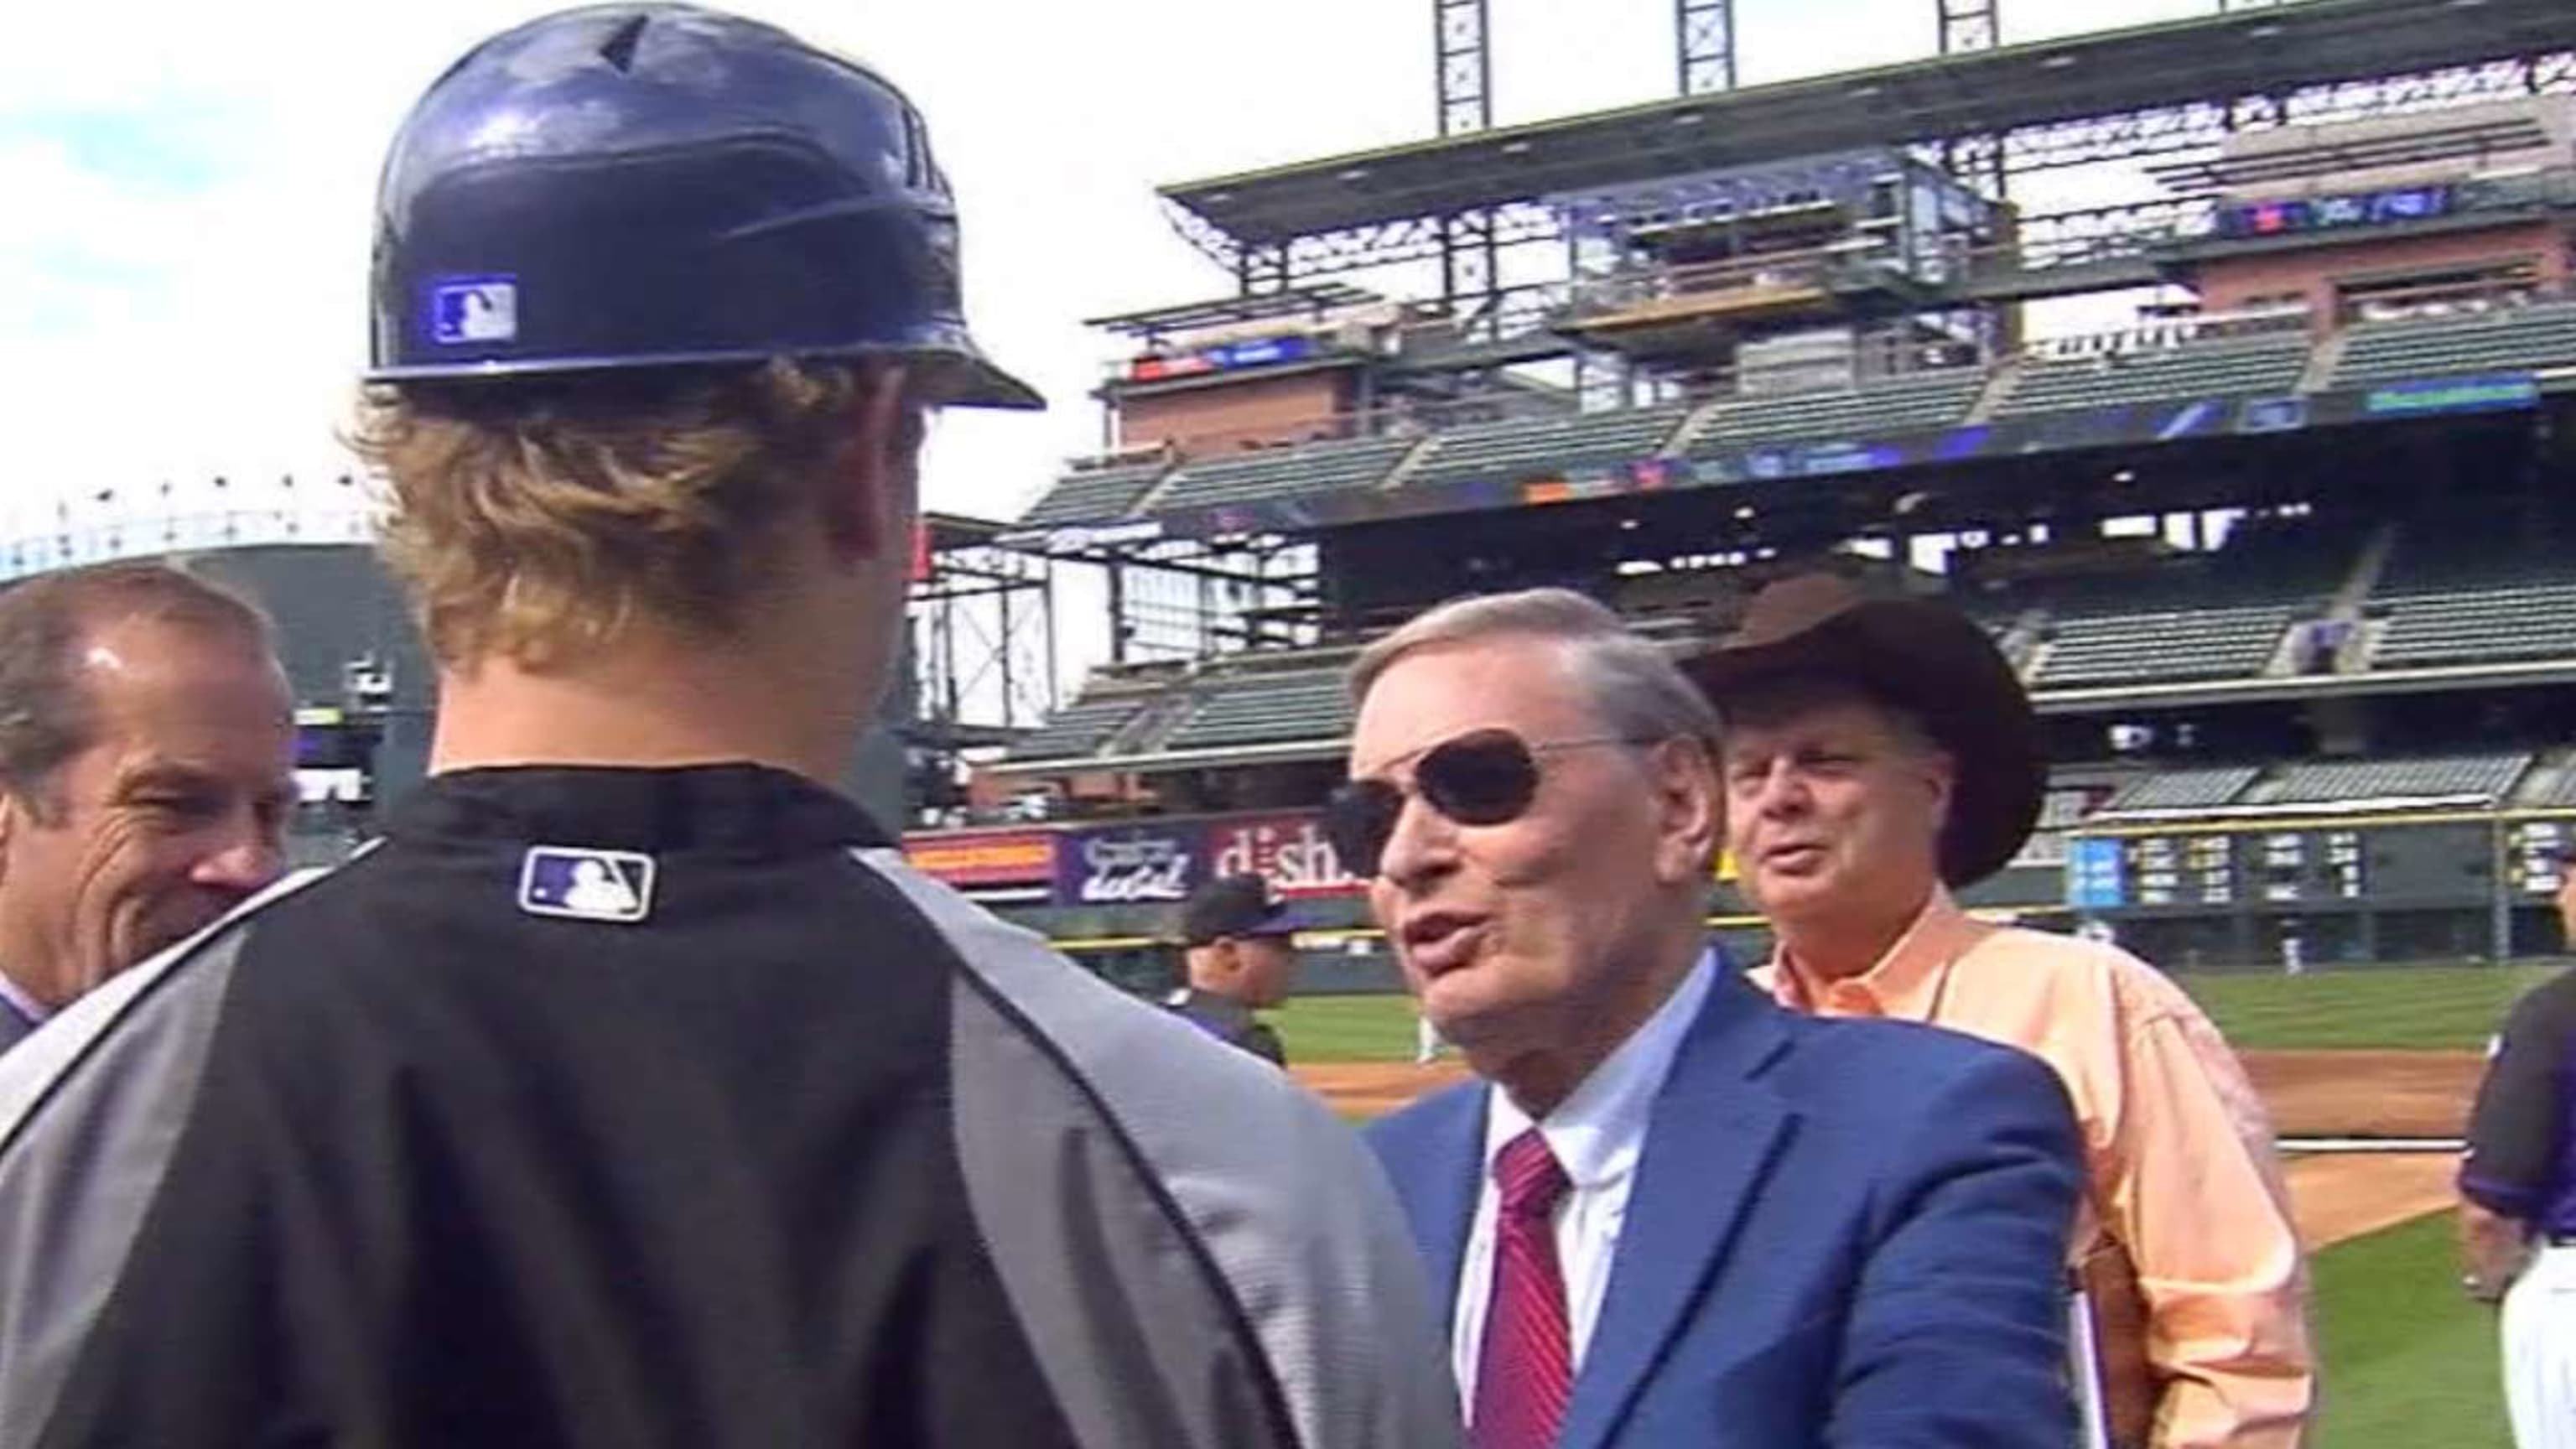 Bud Selig, Once the Commissioner, Is Back to Being a Brewers